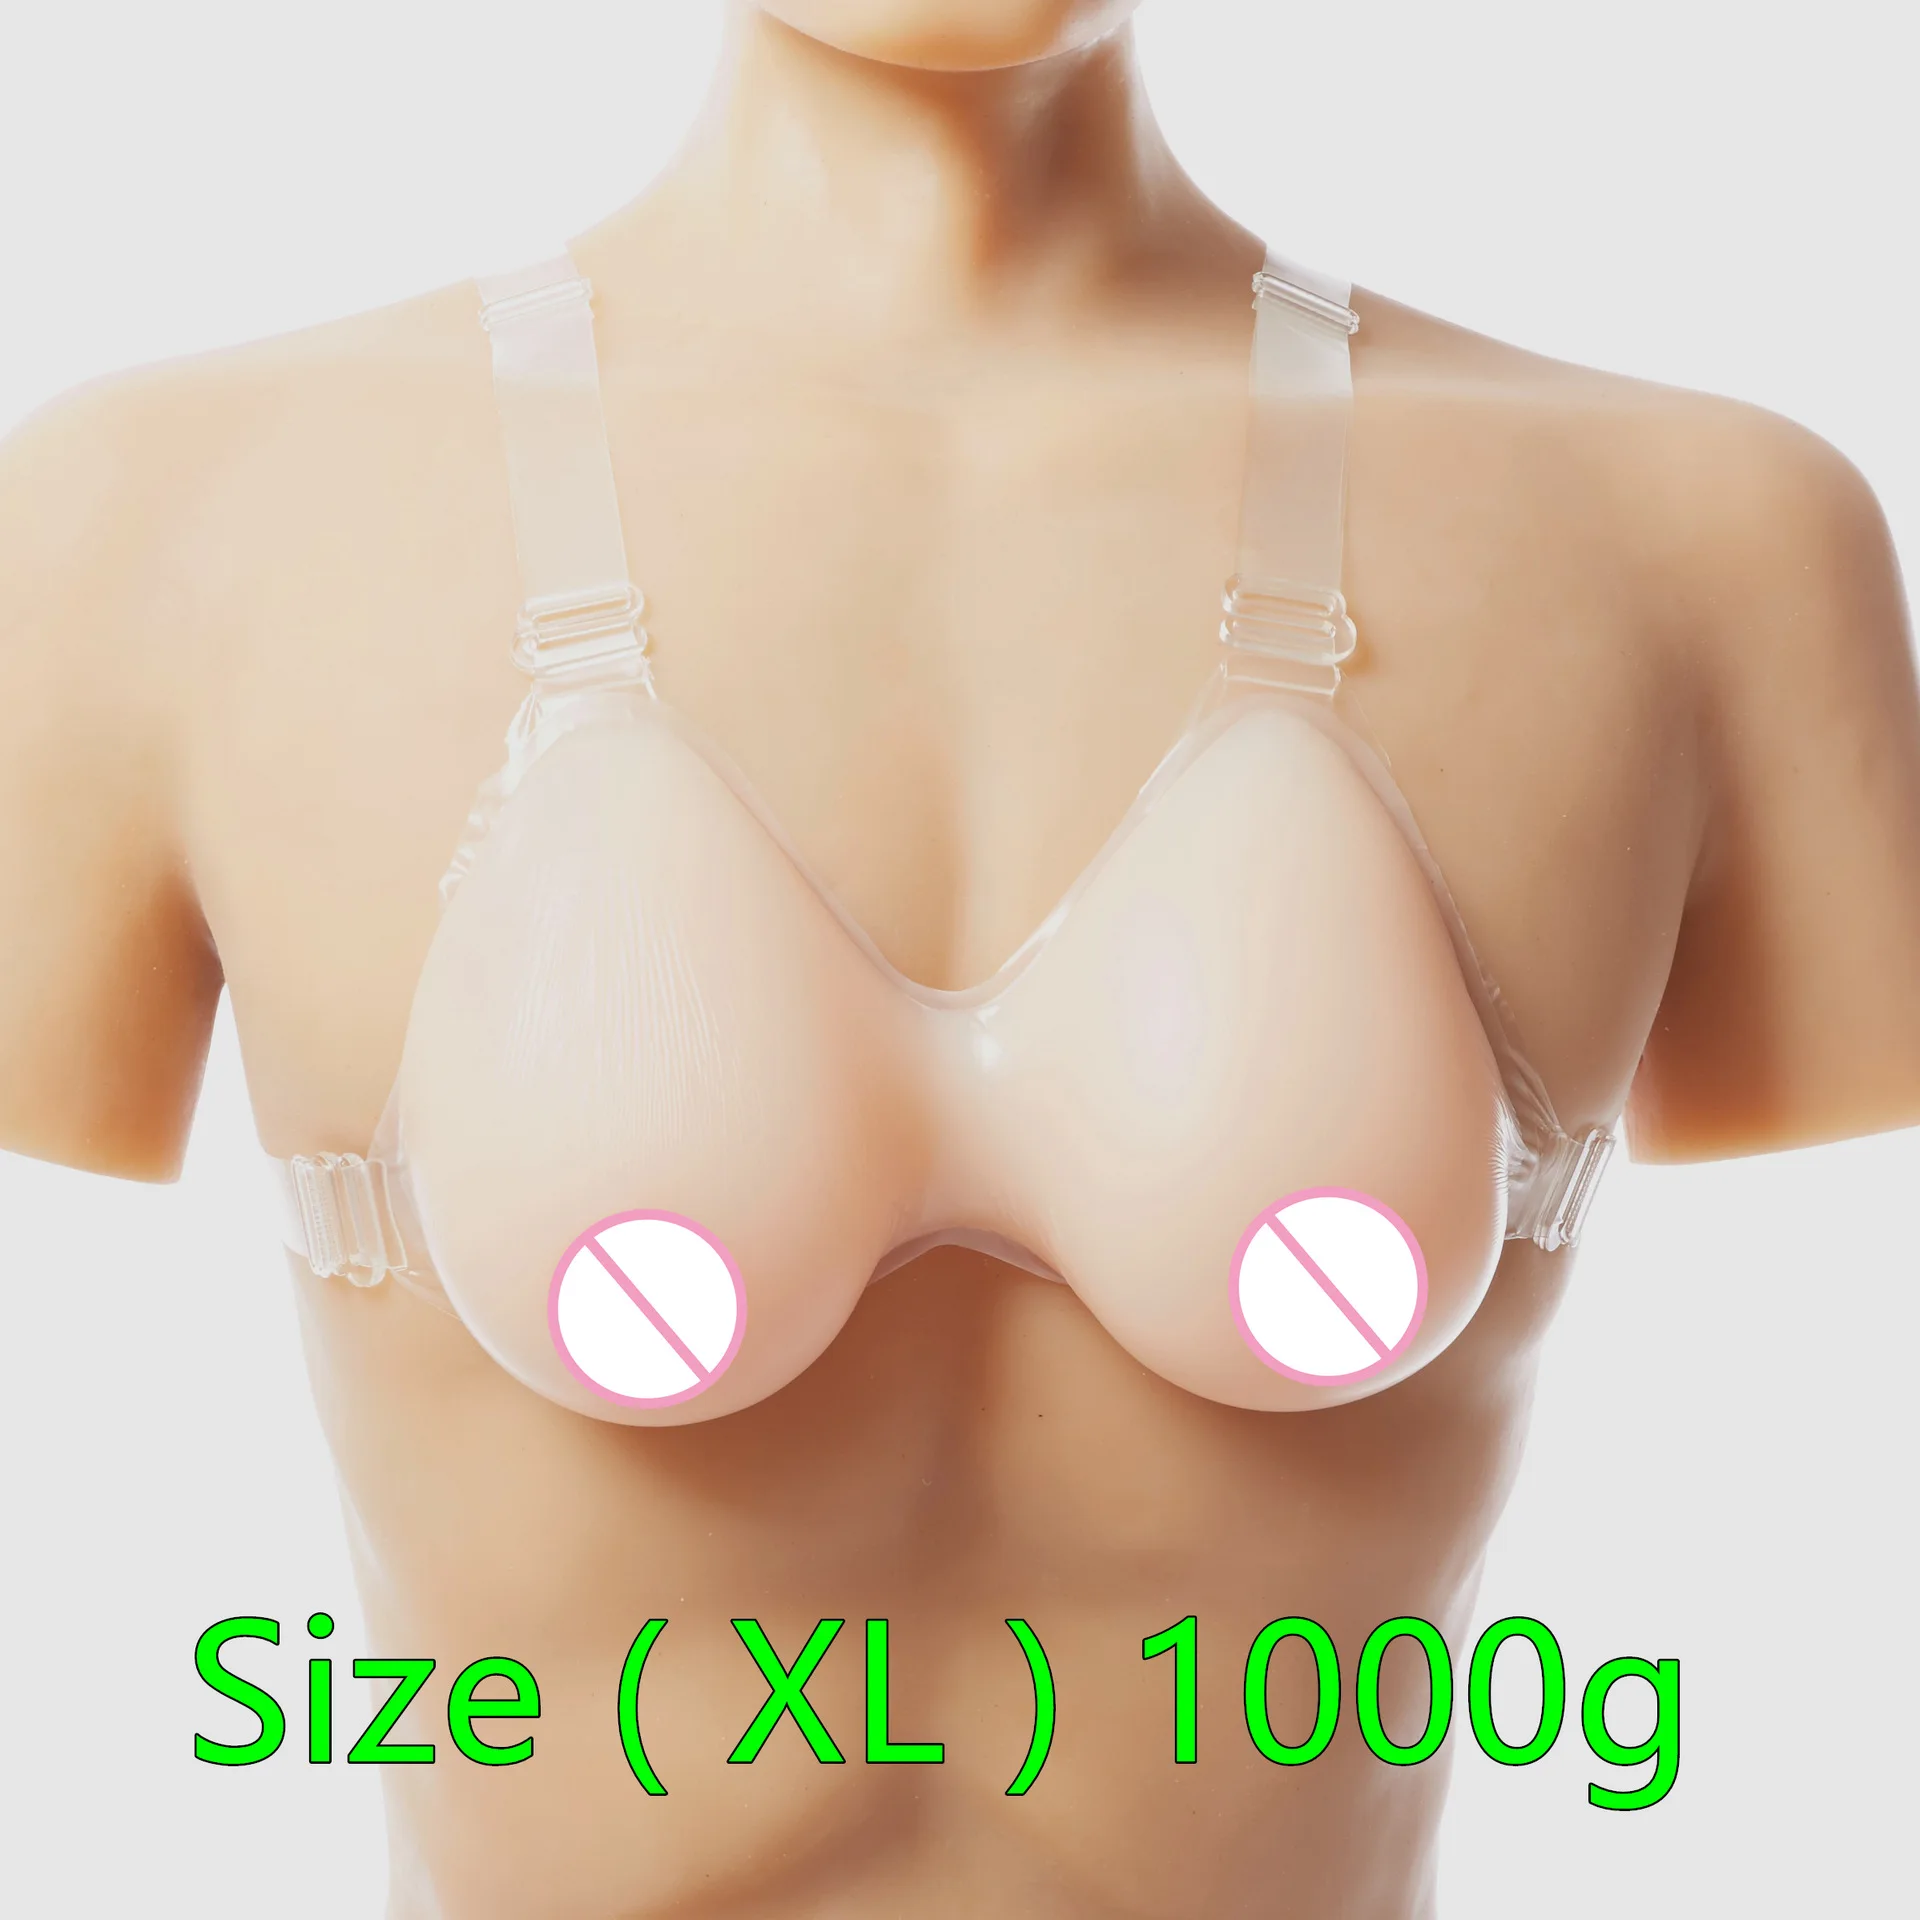 Cosplay 1000g water-drop pseudonym siliconeSilicone Breast Forms Fake Breasts For Crossdresser Postoperative Transvestite Gift